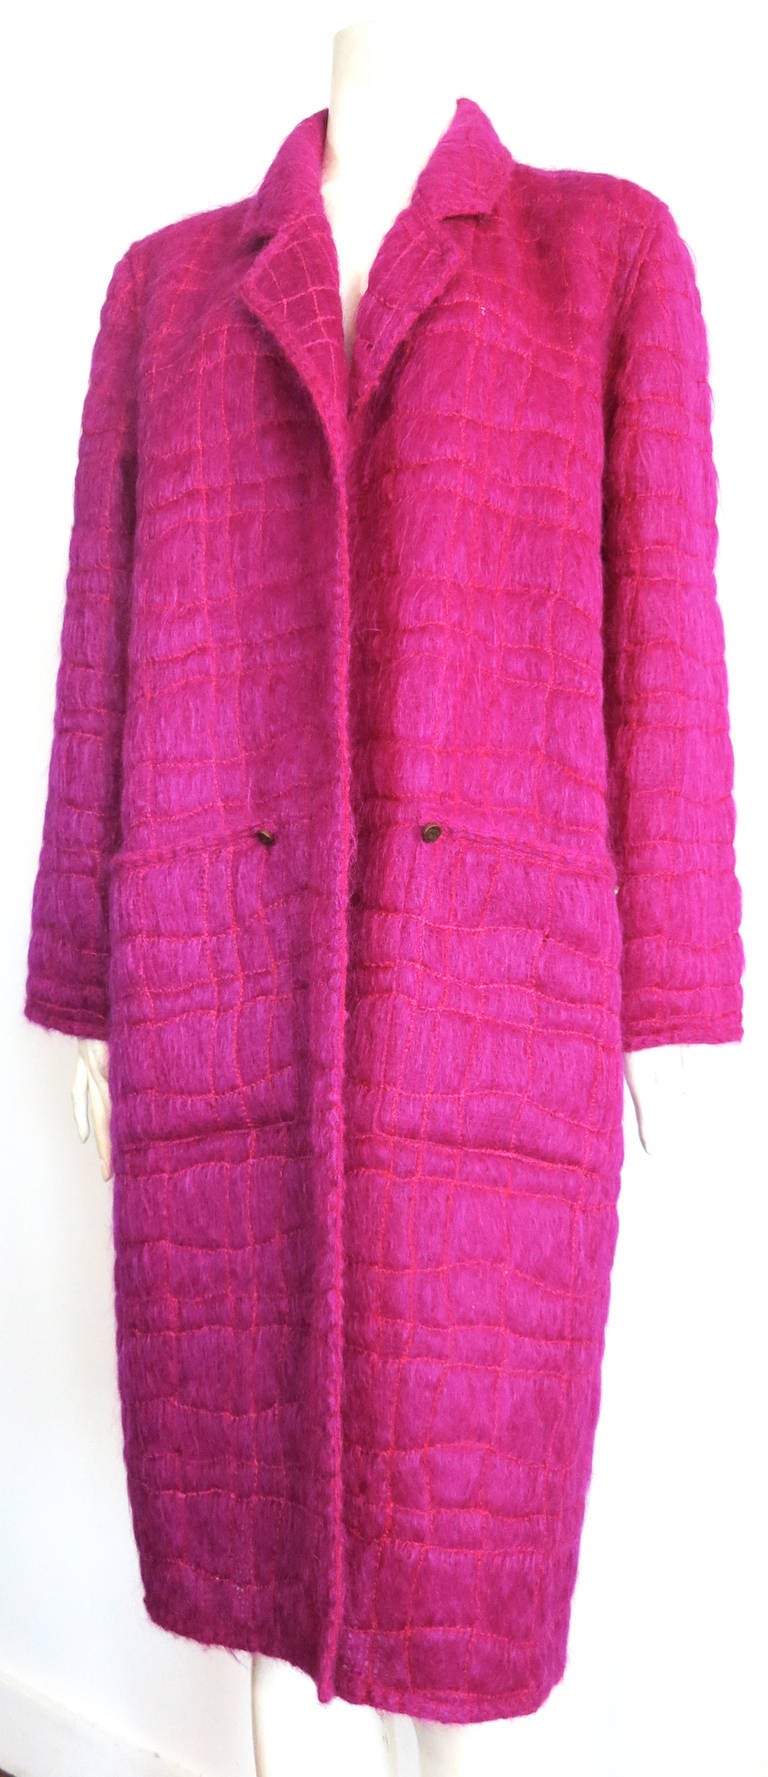 Mint condition CHANEL PARIS Mohair/wool, open front coat.

This gorgeous coat was designed by Karl Lagerfeld for Chanel Paris in France, as labeled.

The coat features light-weight, airy, mohair fabric with an all-over chain-stitched patterning.